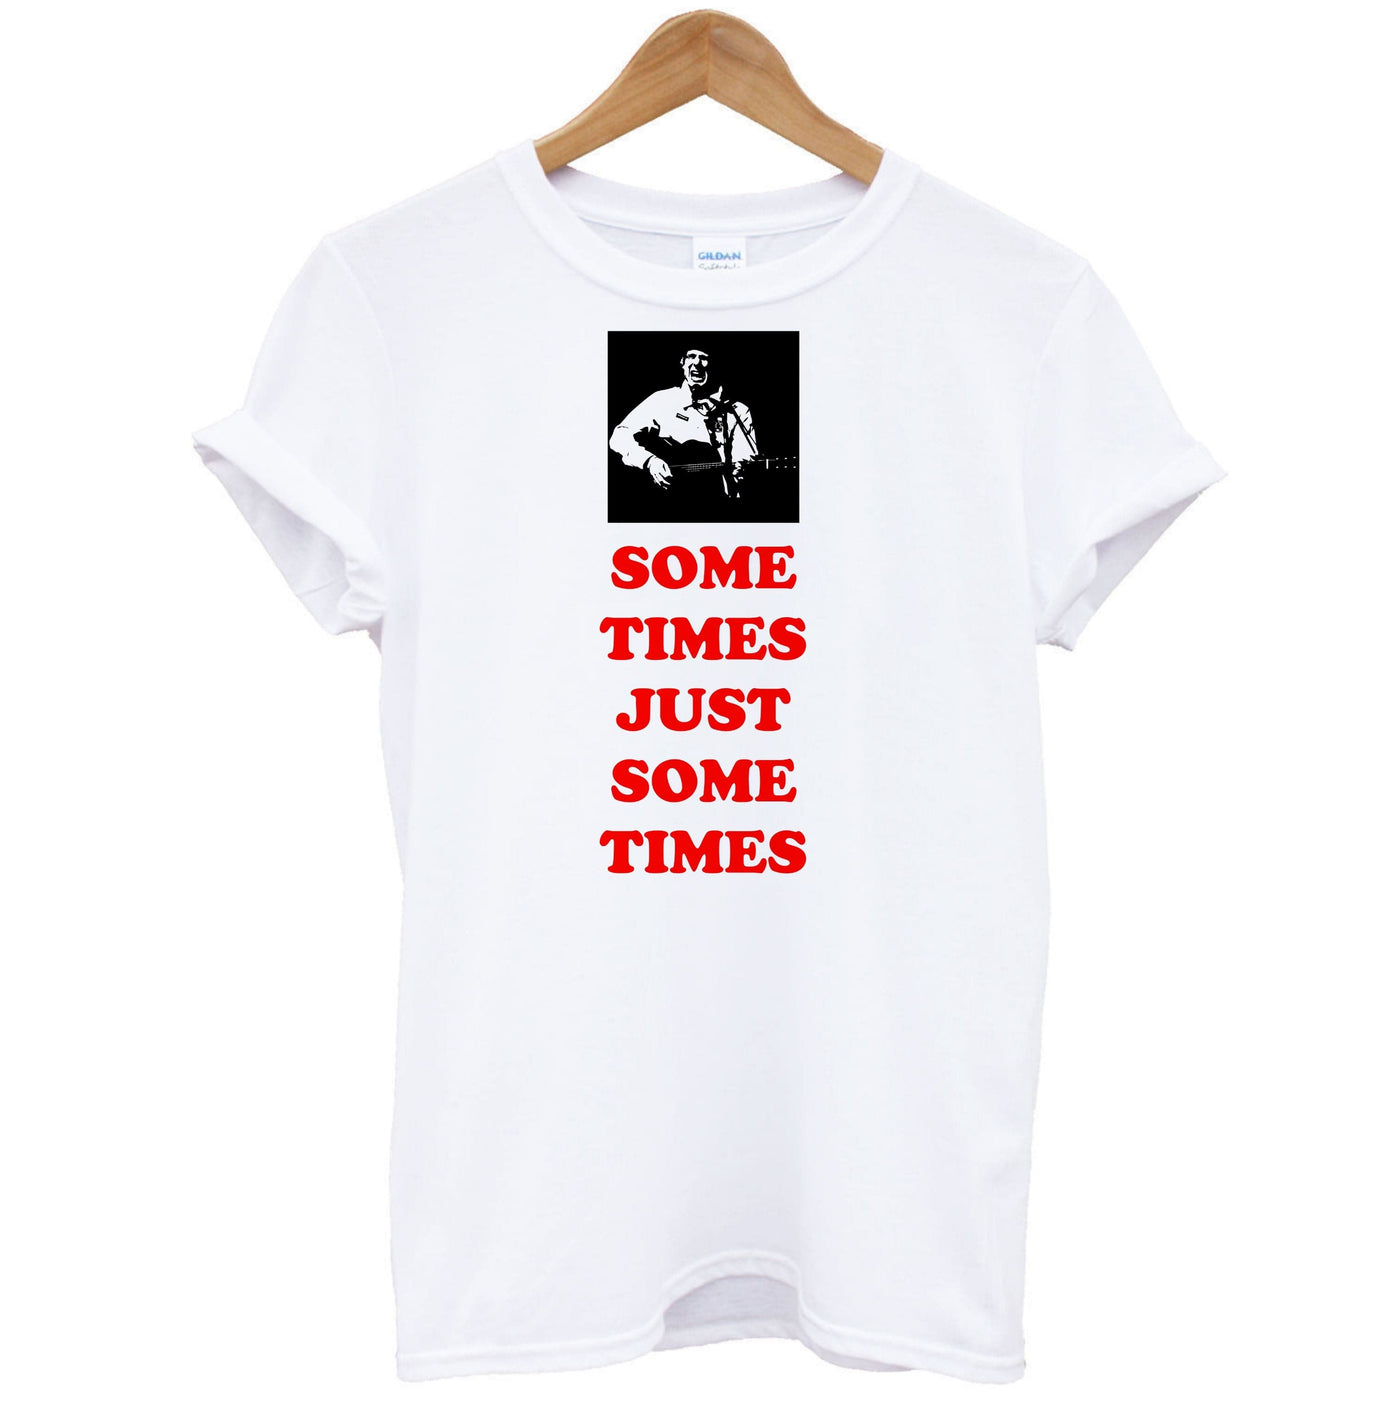 Some Times Just Some Times - Festival T-Shirt